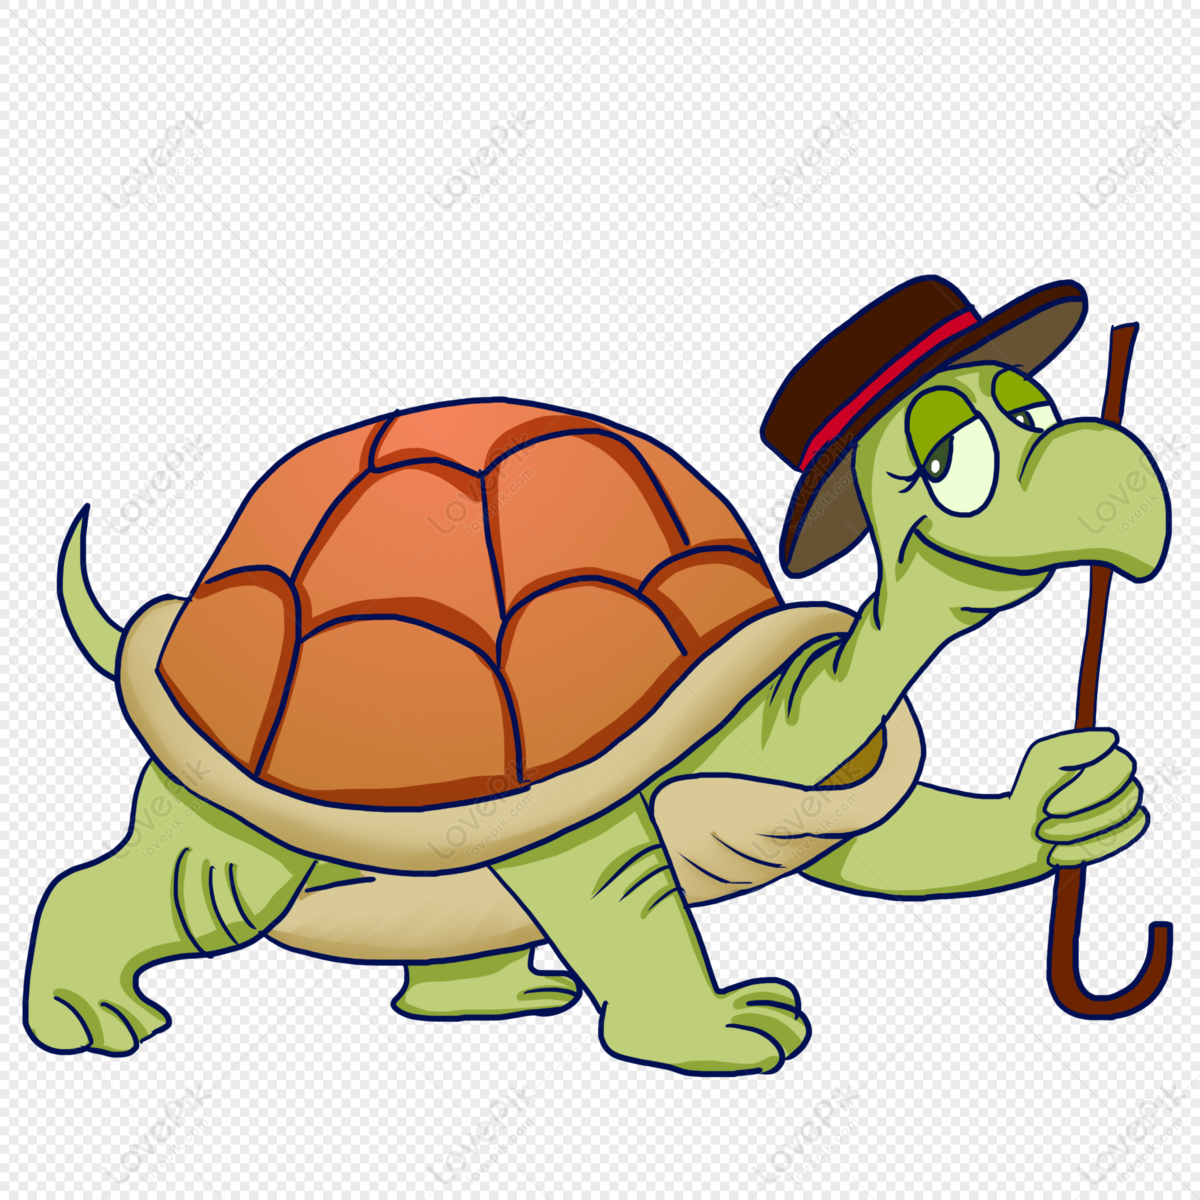 Tortoise PNG Image Free Download And Clipart Image For Free Download -  Lovepik | 401527901